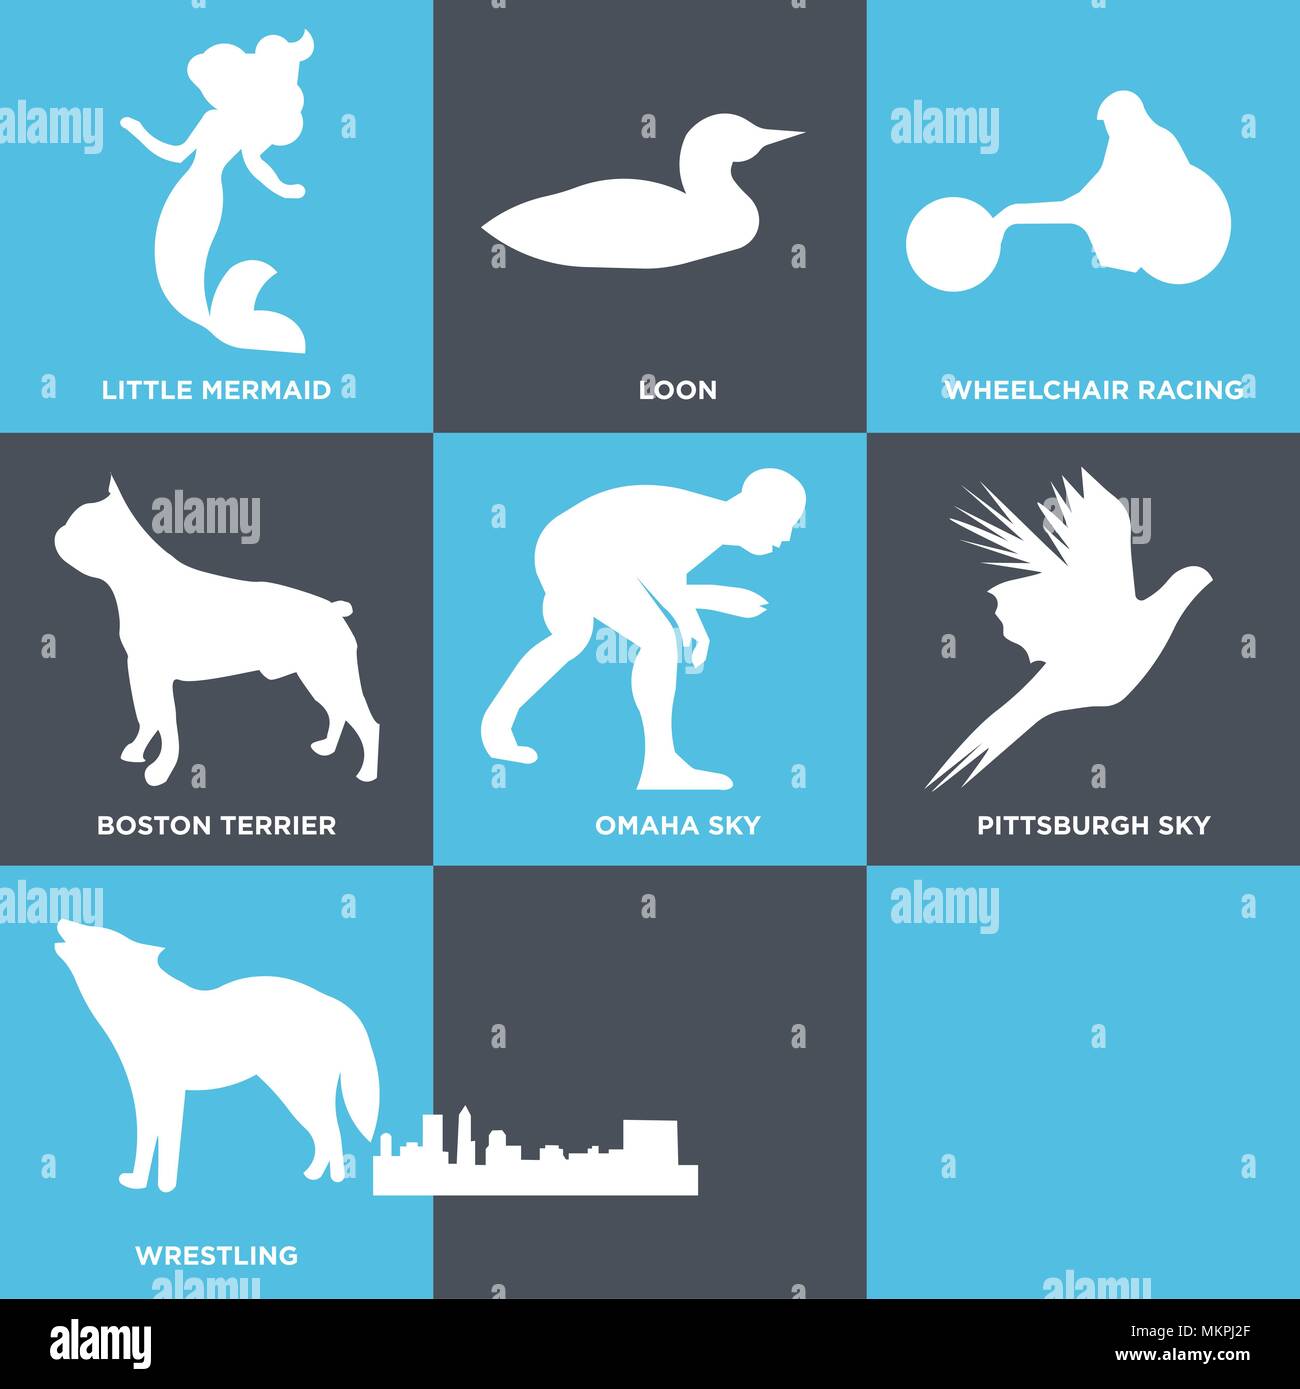 Set Of 9 simple editable icons such as howling wolf, flying pheasant, wrestling, pittsburgh sky, omaha boston terrier, wheelchair racing, loon, little Stock Vector